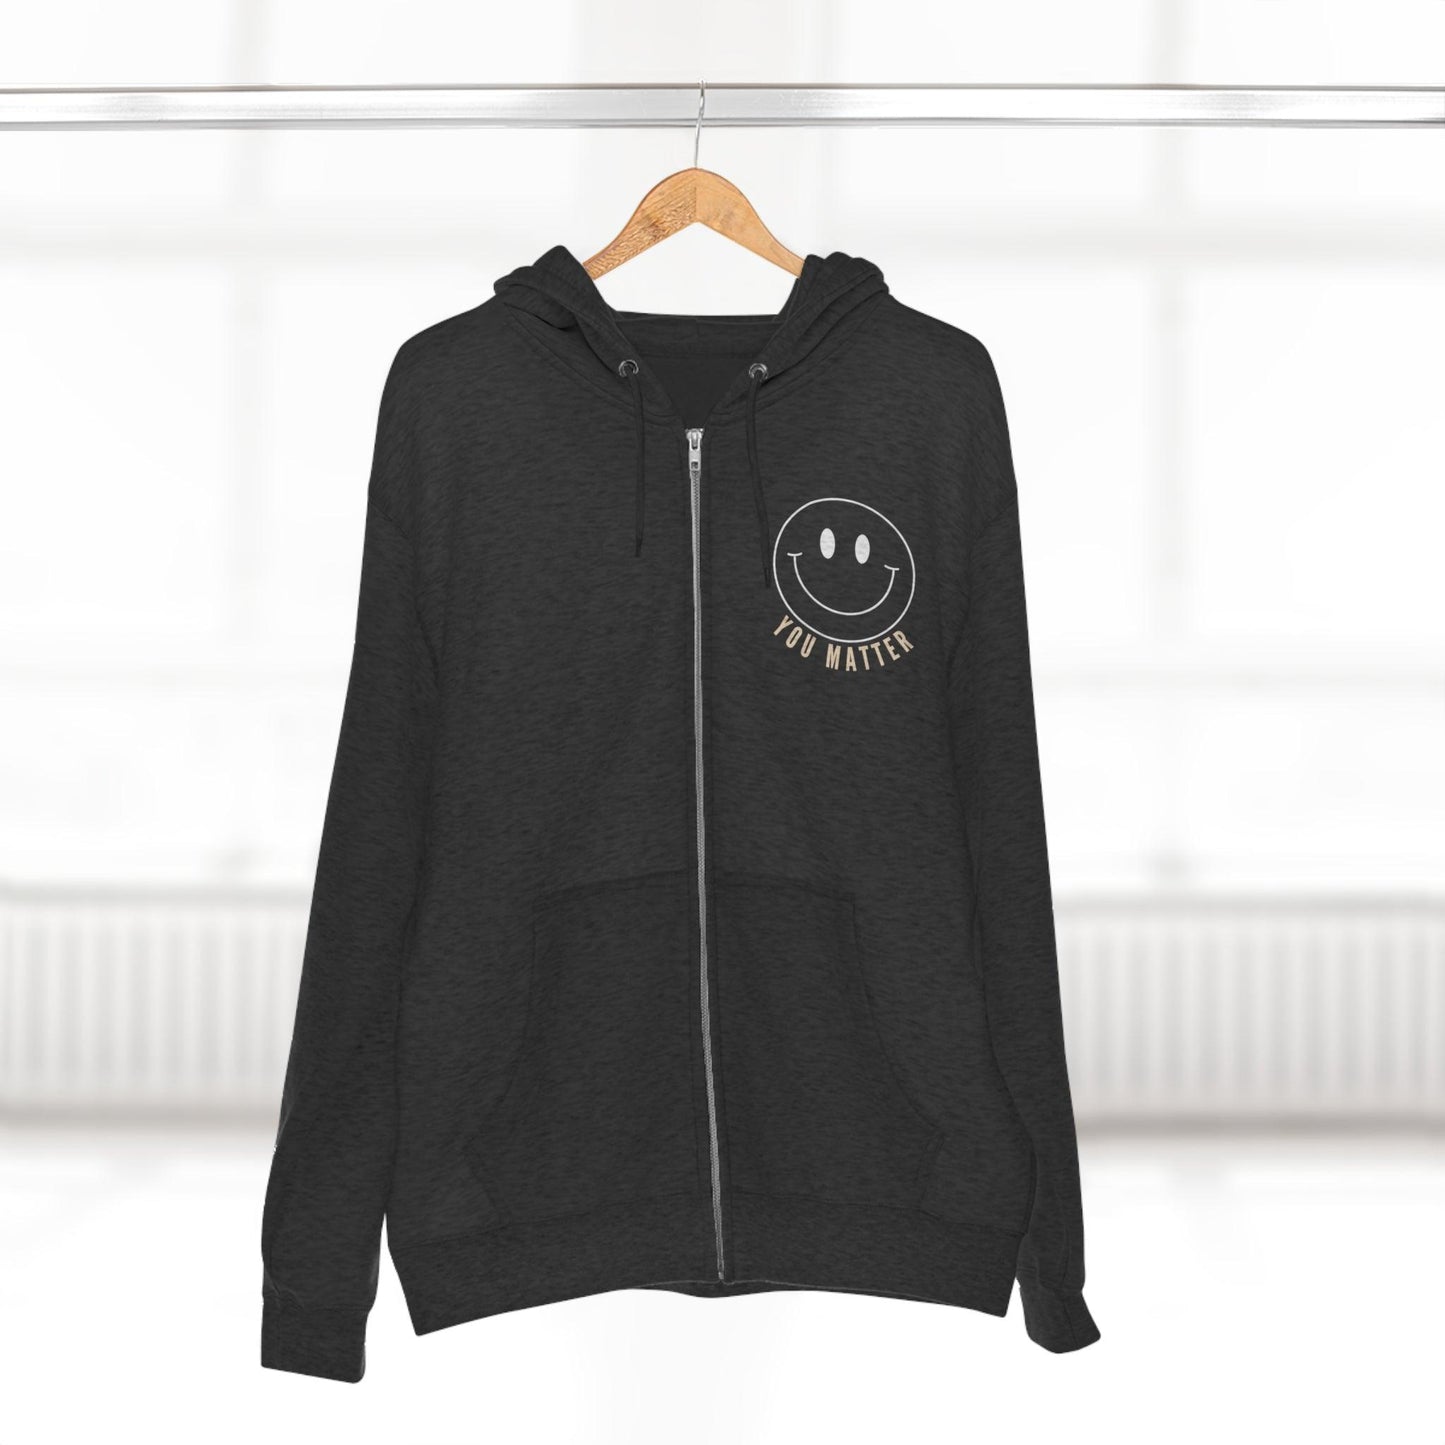 To the Person Behind Me, YOU MATTER - Full Zip Hoodie - Wicked Naughty Apparel